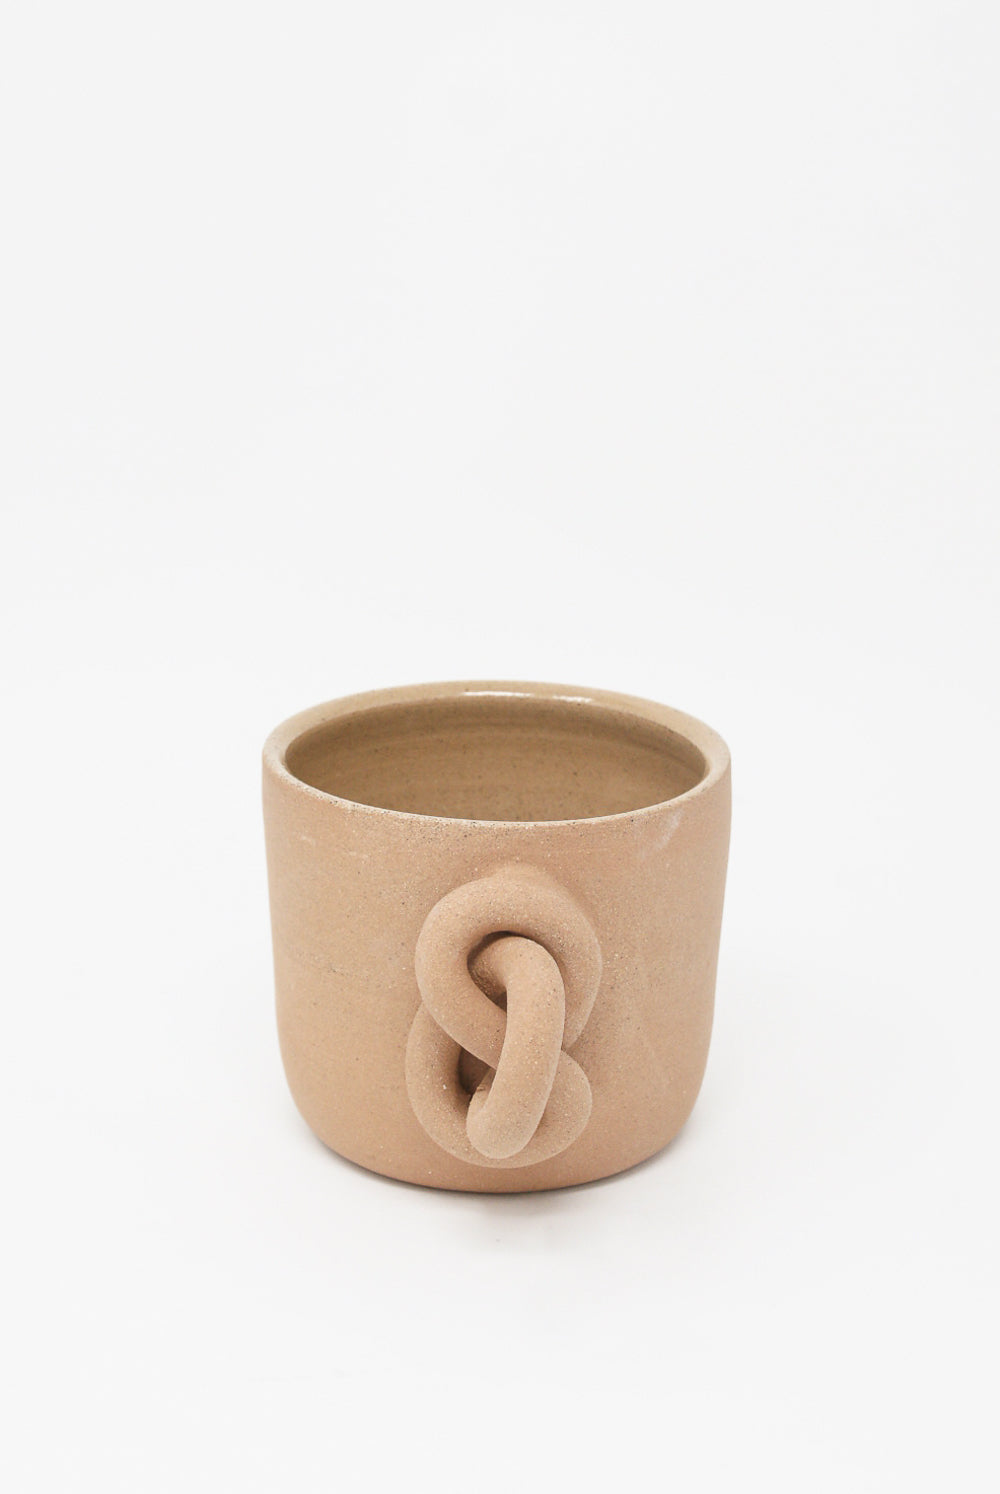 Lost Quarry - Single Knot Mug in Terracotta handle view